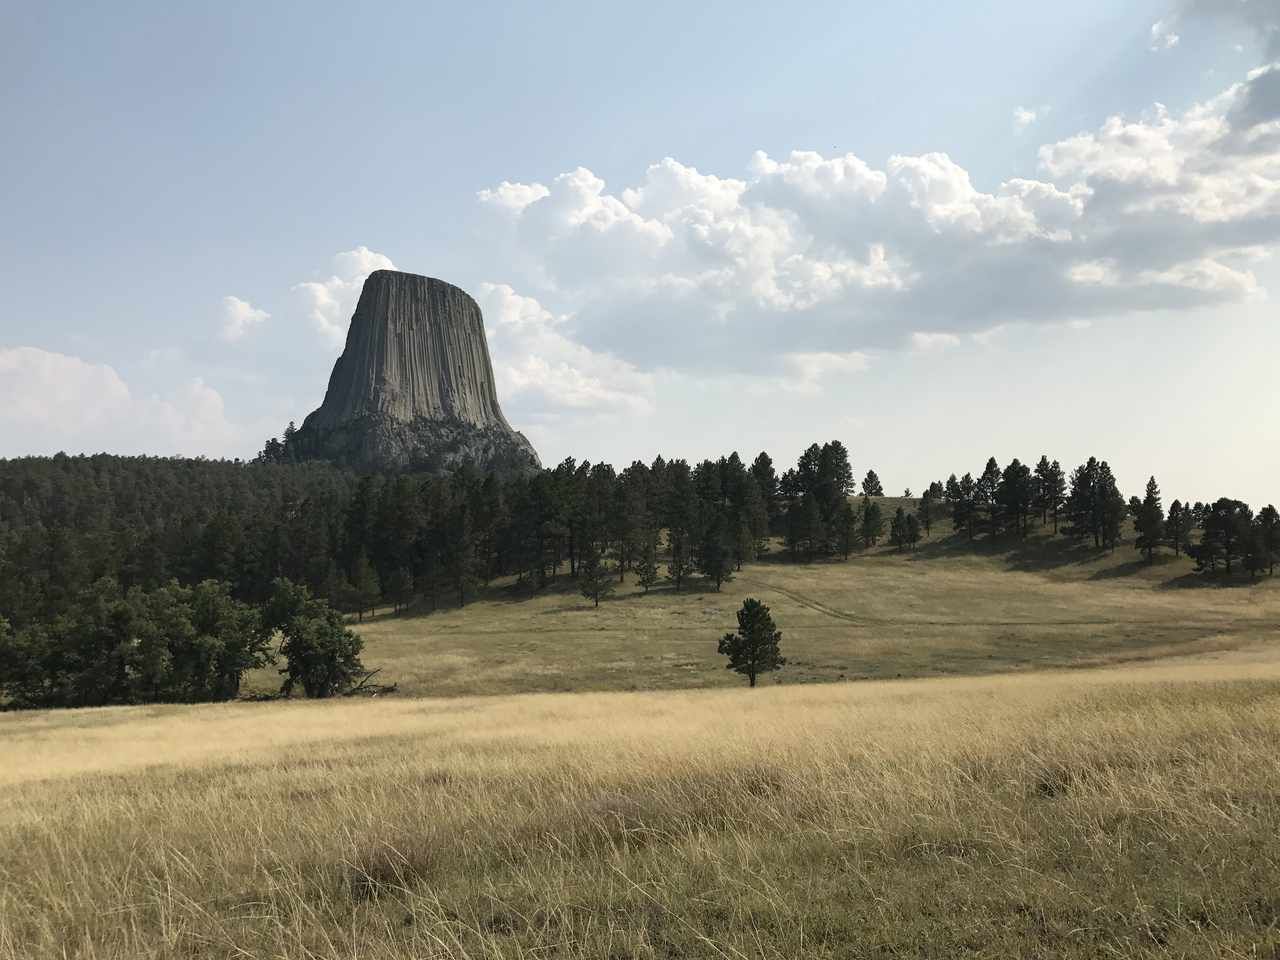 View from the trail at Devil's Tower in Wyoming